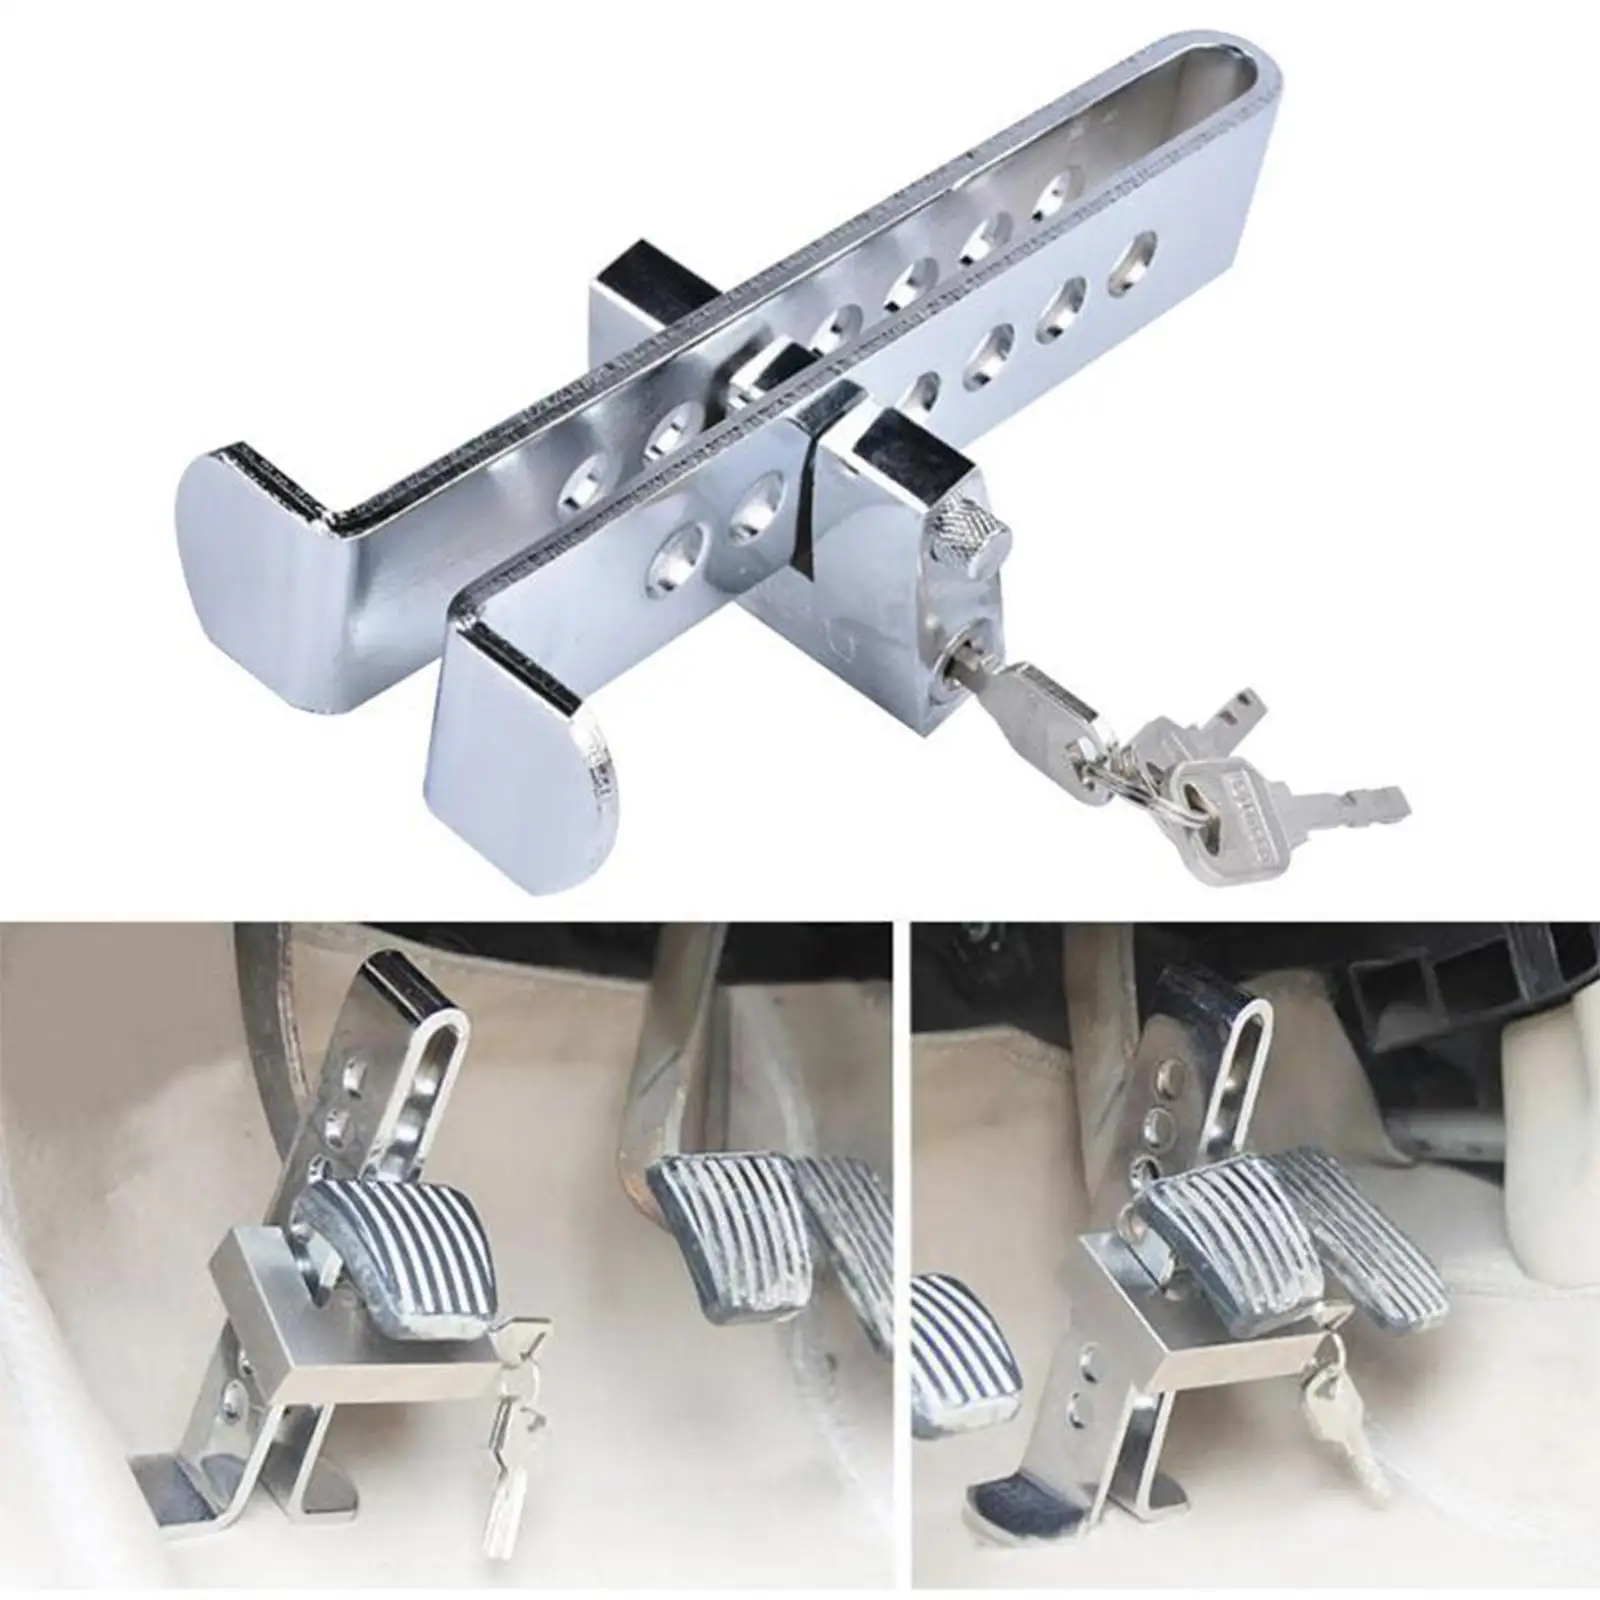 Car Clutch Lock Auto Brake Pedal Lock Fit for Vehicle Accessories Tools